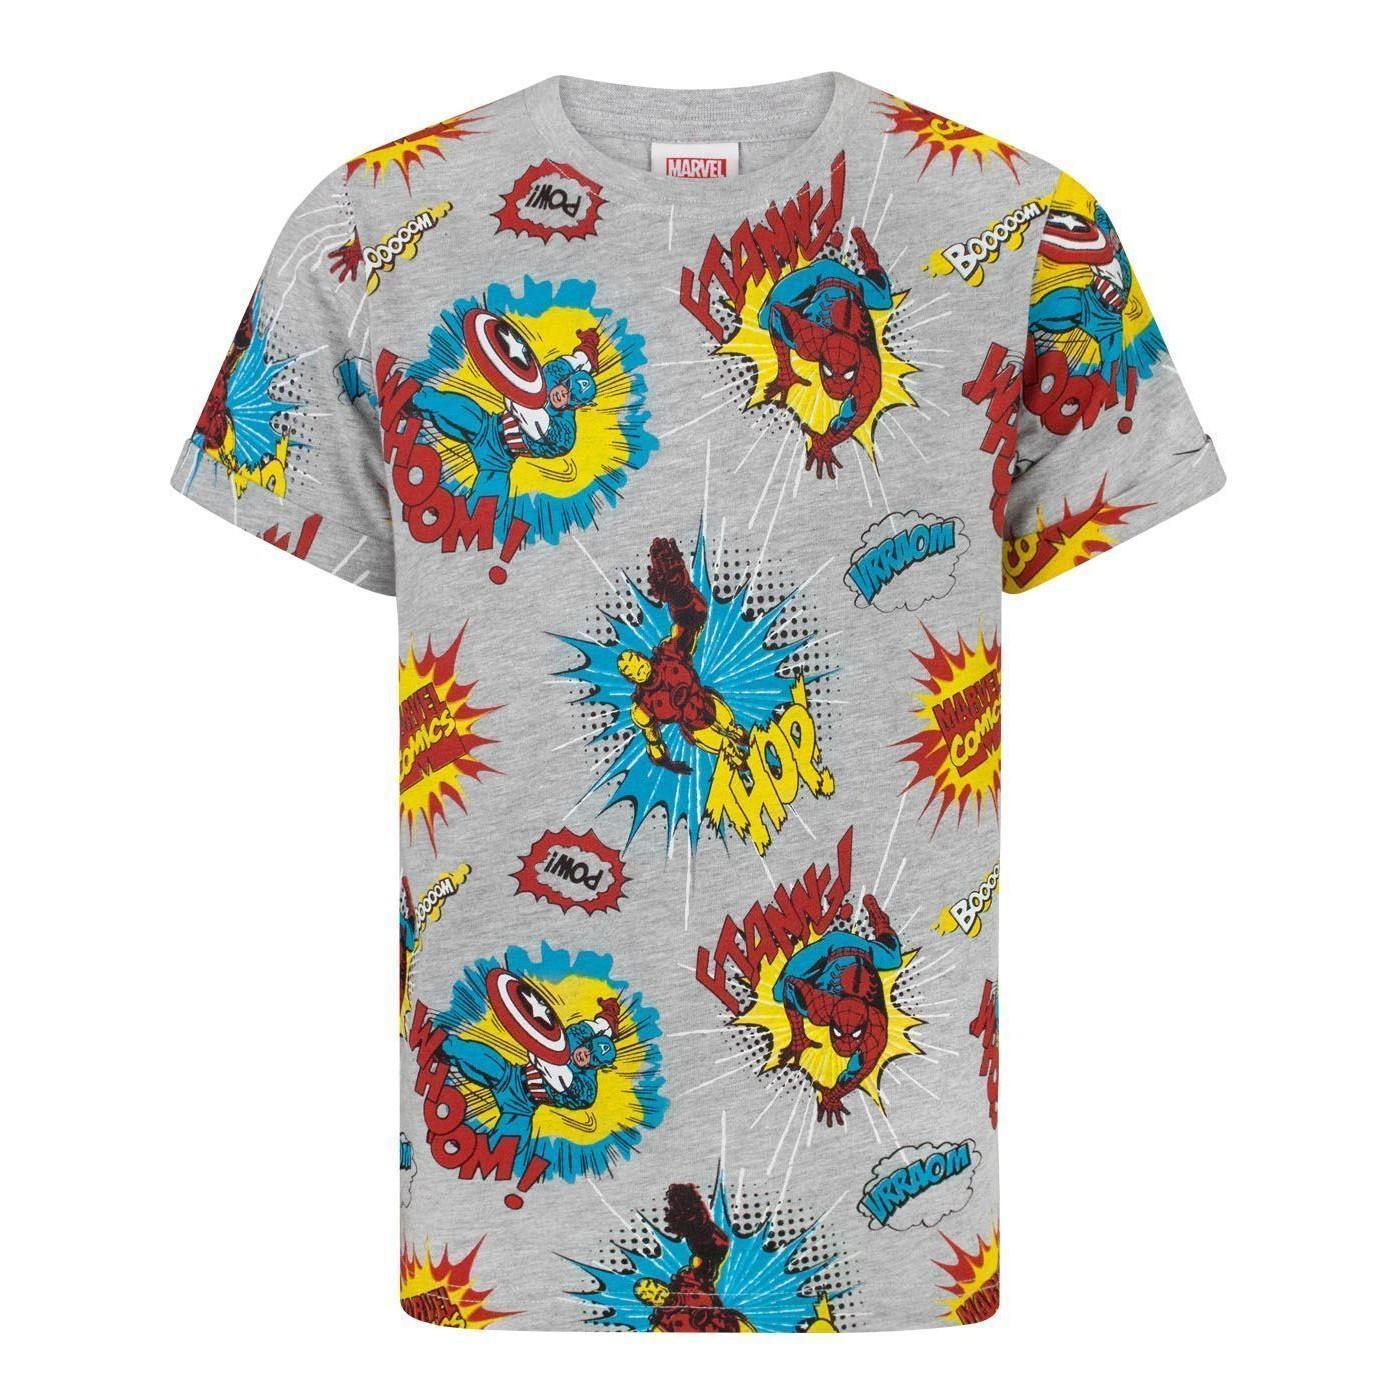 Marvel Boys All-Over Print T-Shirt (Heather Grey/Red/Yellow) (11-12 Years)